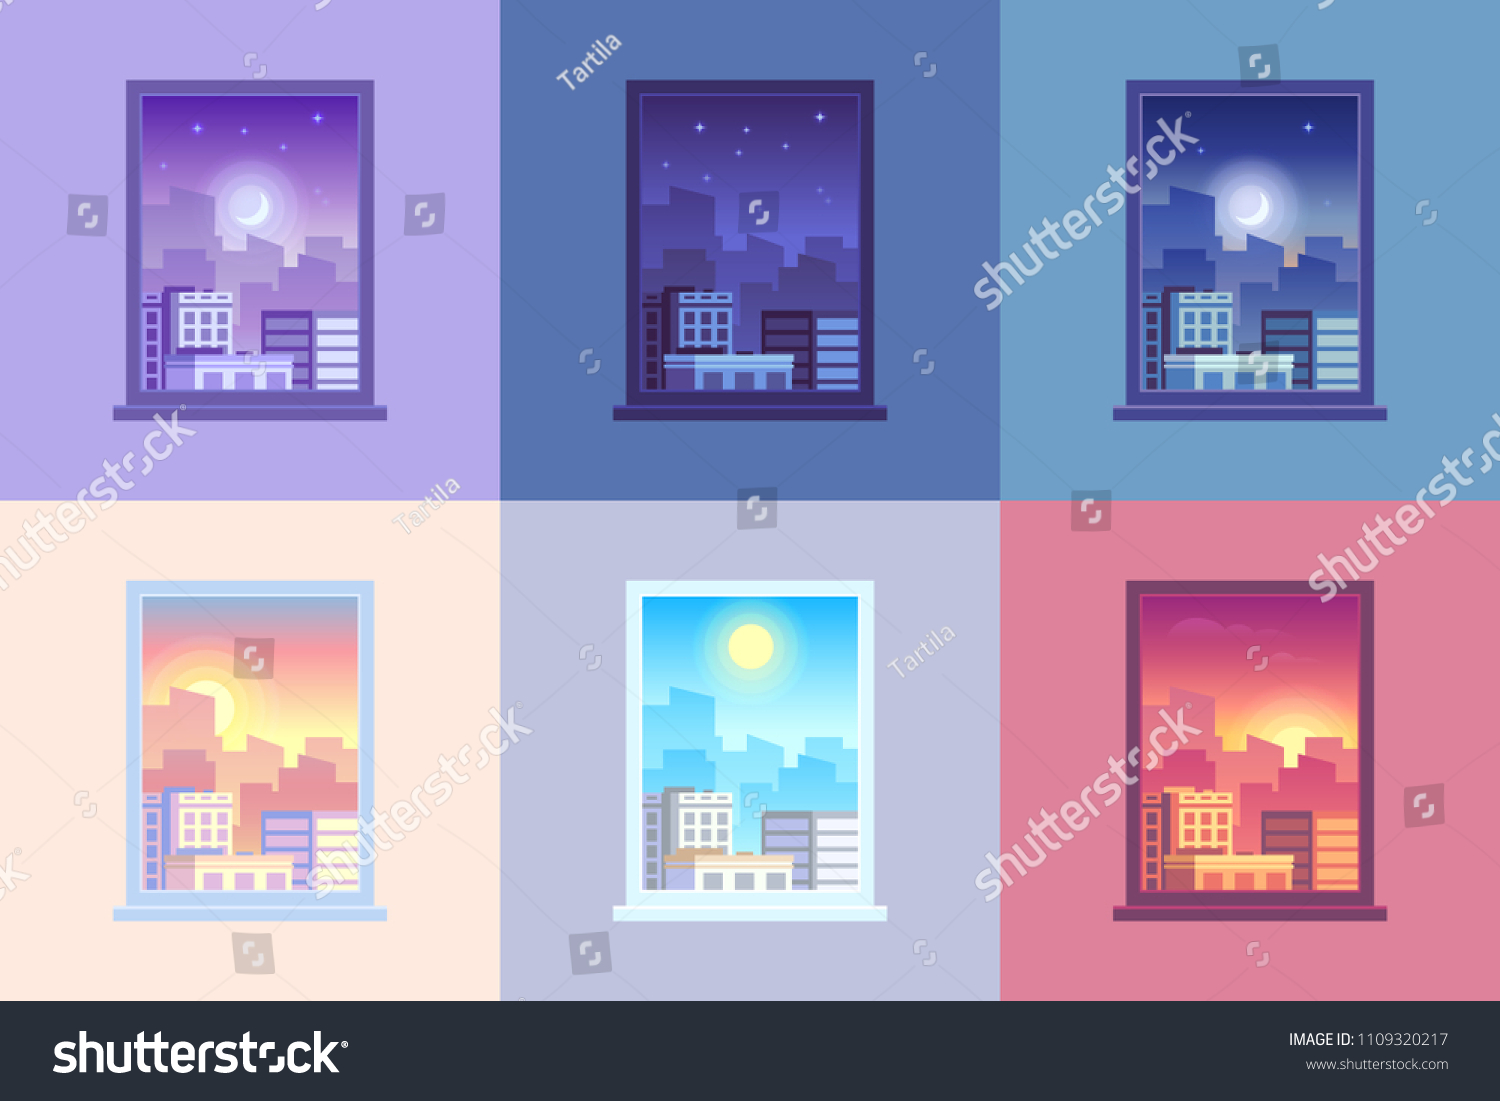 Window day time view. Sunrise sun dawn morning noon sunset dusk afternoon day and night stars at city house windows apartment colorful purple orange blue pink cartoon vector concept illustration